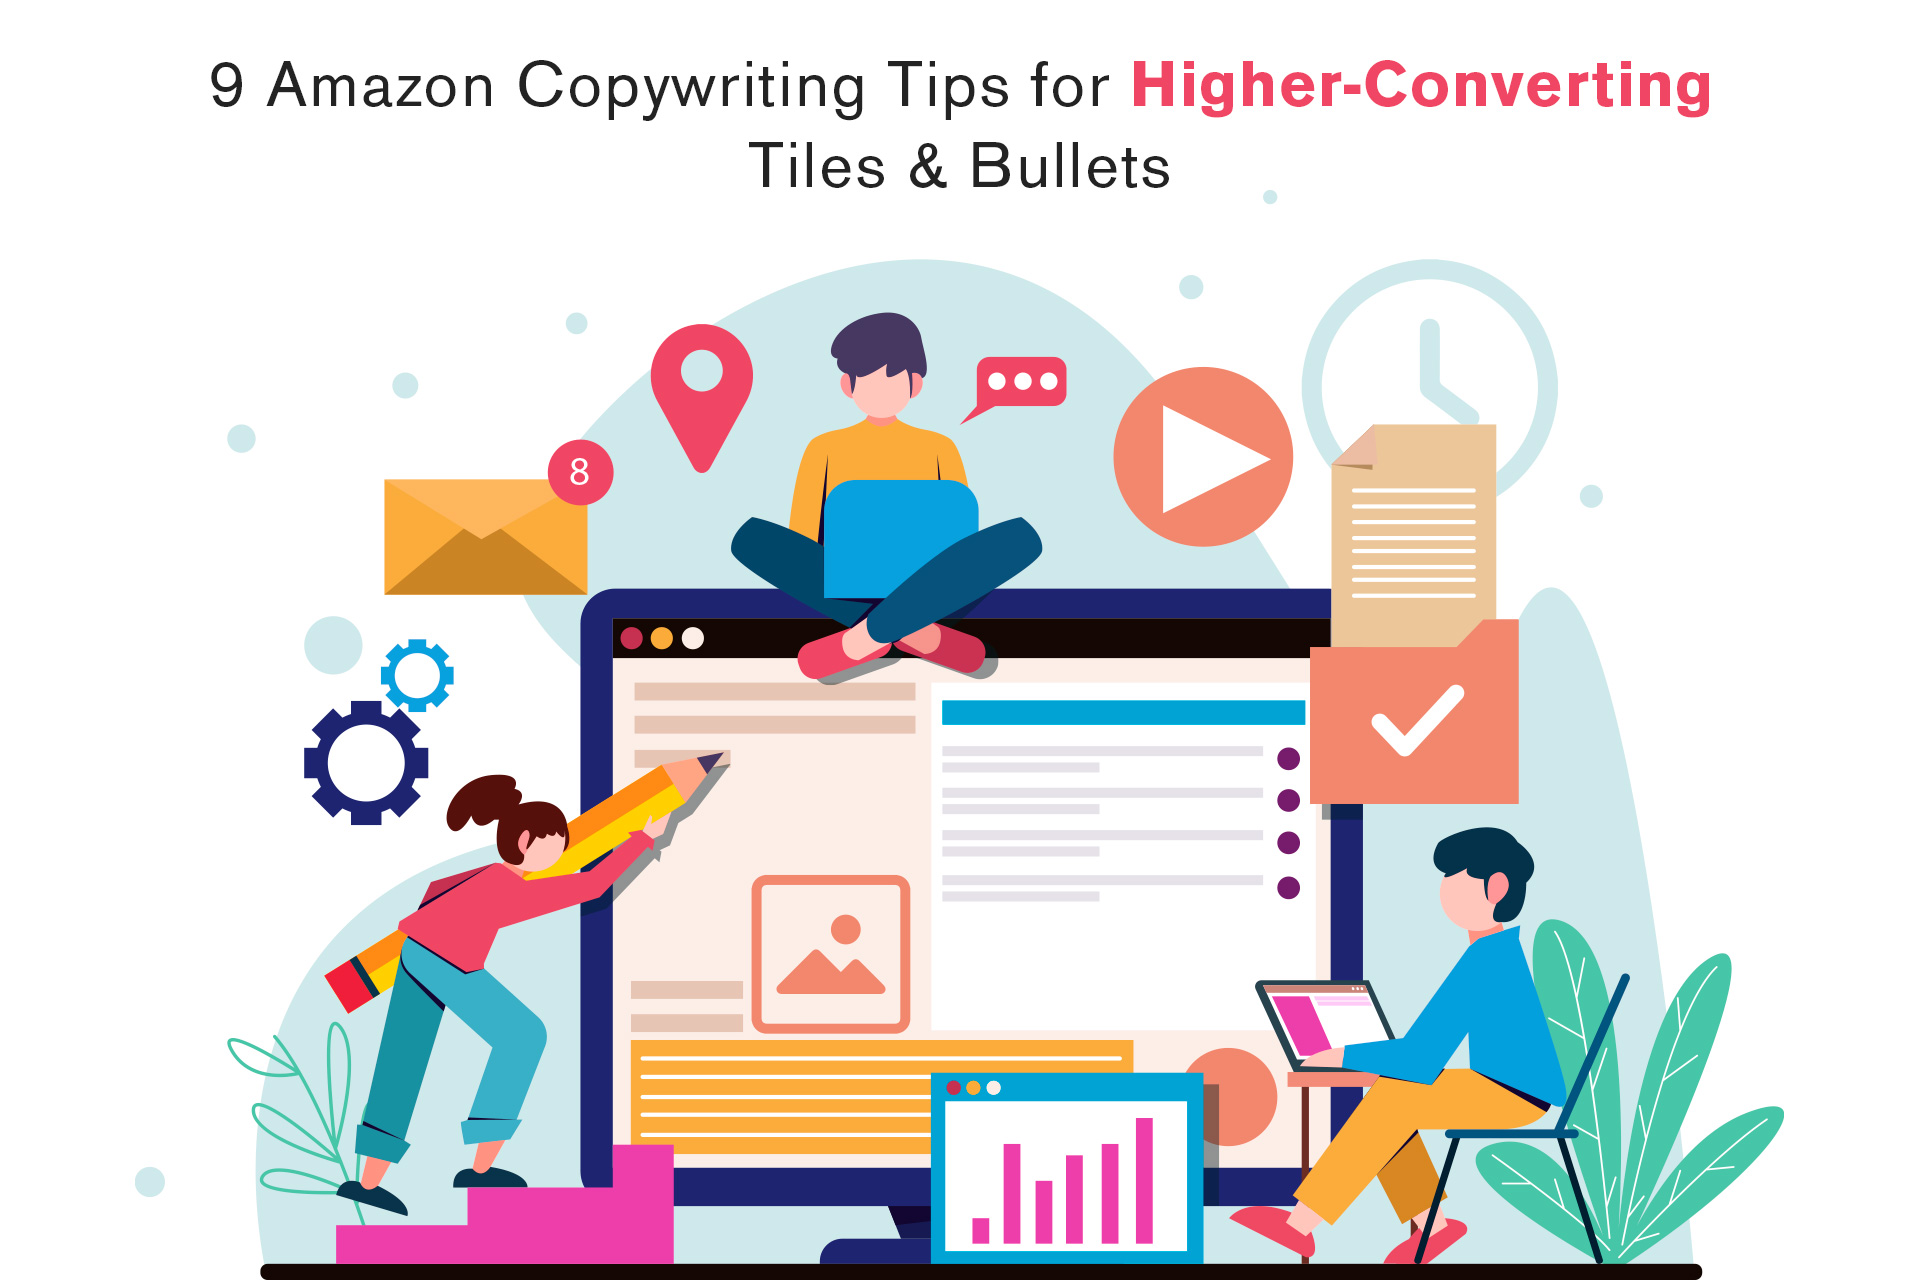 9 Amazon Copywriting Tips for Higher-Converting Tiles & Bullets